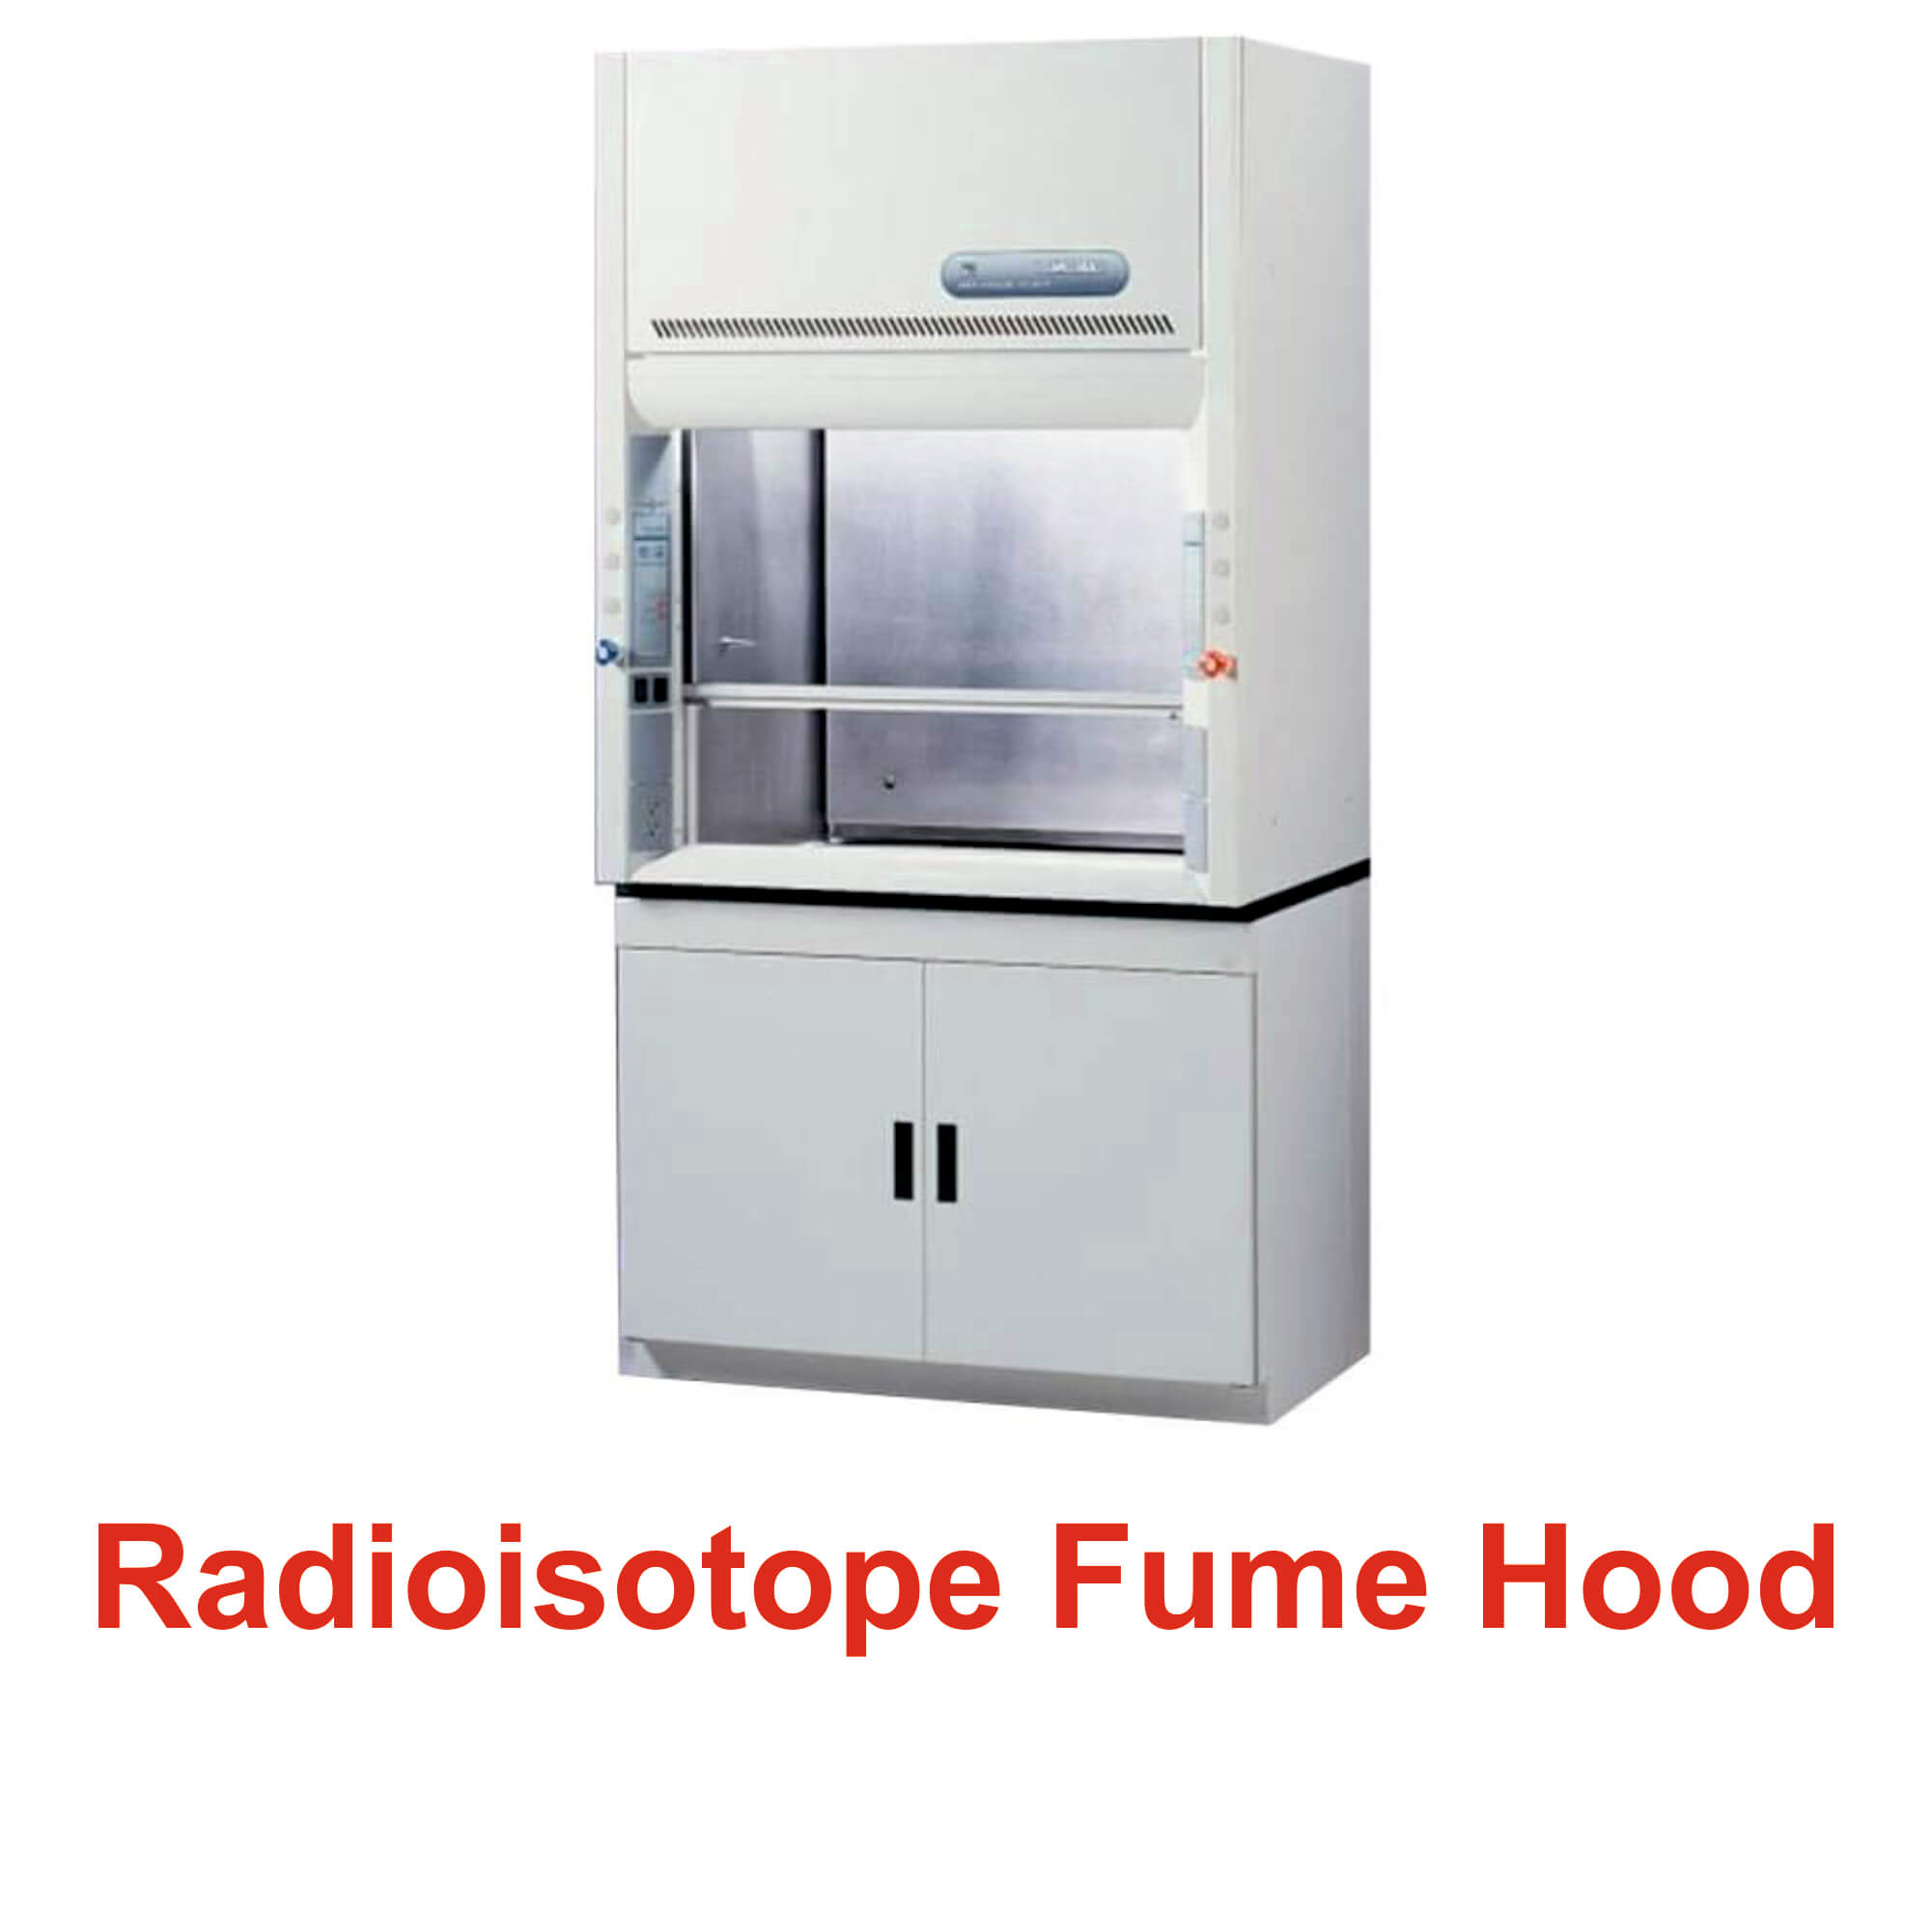 Radioisotope Fume Hood Manufacturer in India